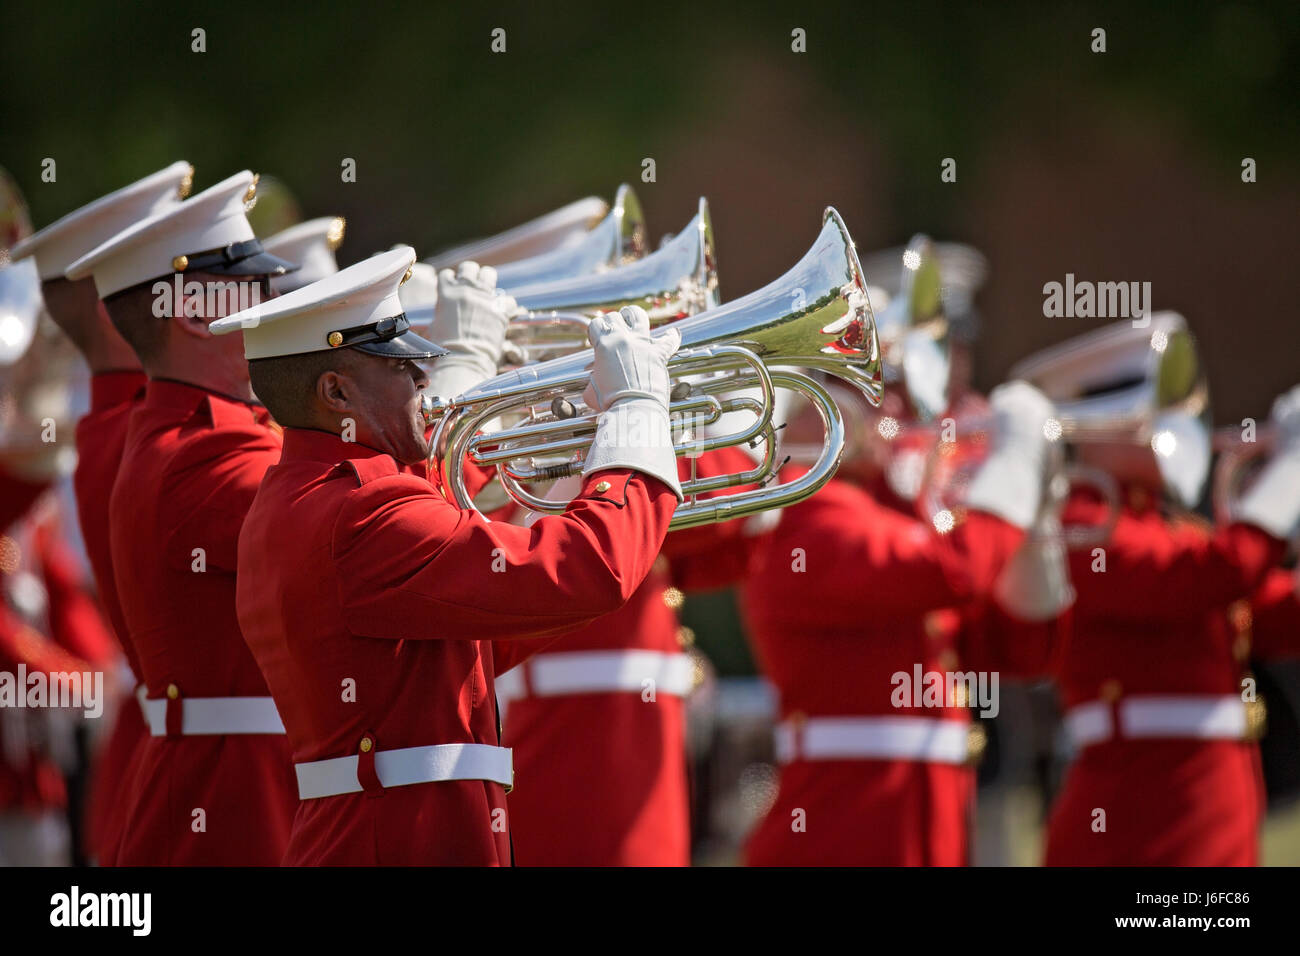 Members of the U.S. Marine Drum & Bugle Corps perform during the Centennial Celebration Ceremony at Lejeune Field, Marine Corps Base (MCB) Quantico, Va., May 10, 2017. The event commemorates the founding of MCB Quantico in 1917, and consisted of performances by the U.S. Marine Corps Silent Drill Platoon and the U.S. Marine Drum & Bugle Corps. (U.S. Marine Corps photo by James H. Frank) Stock Photo